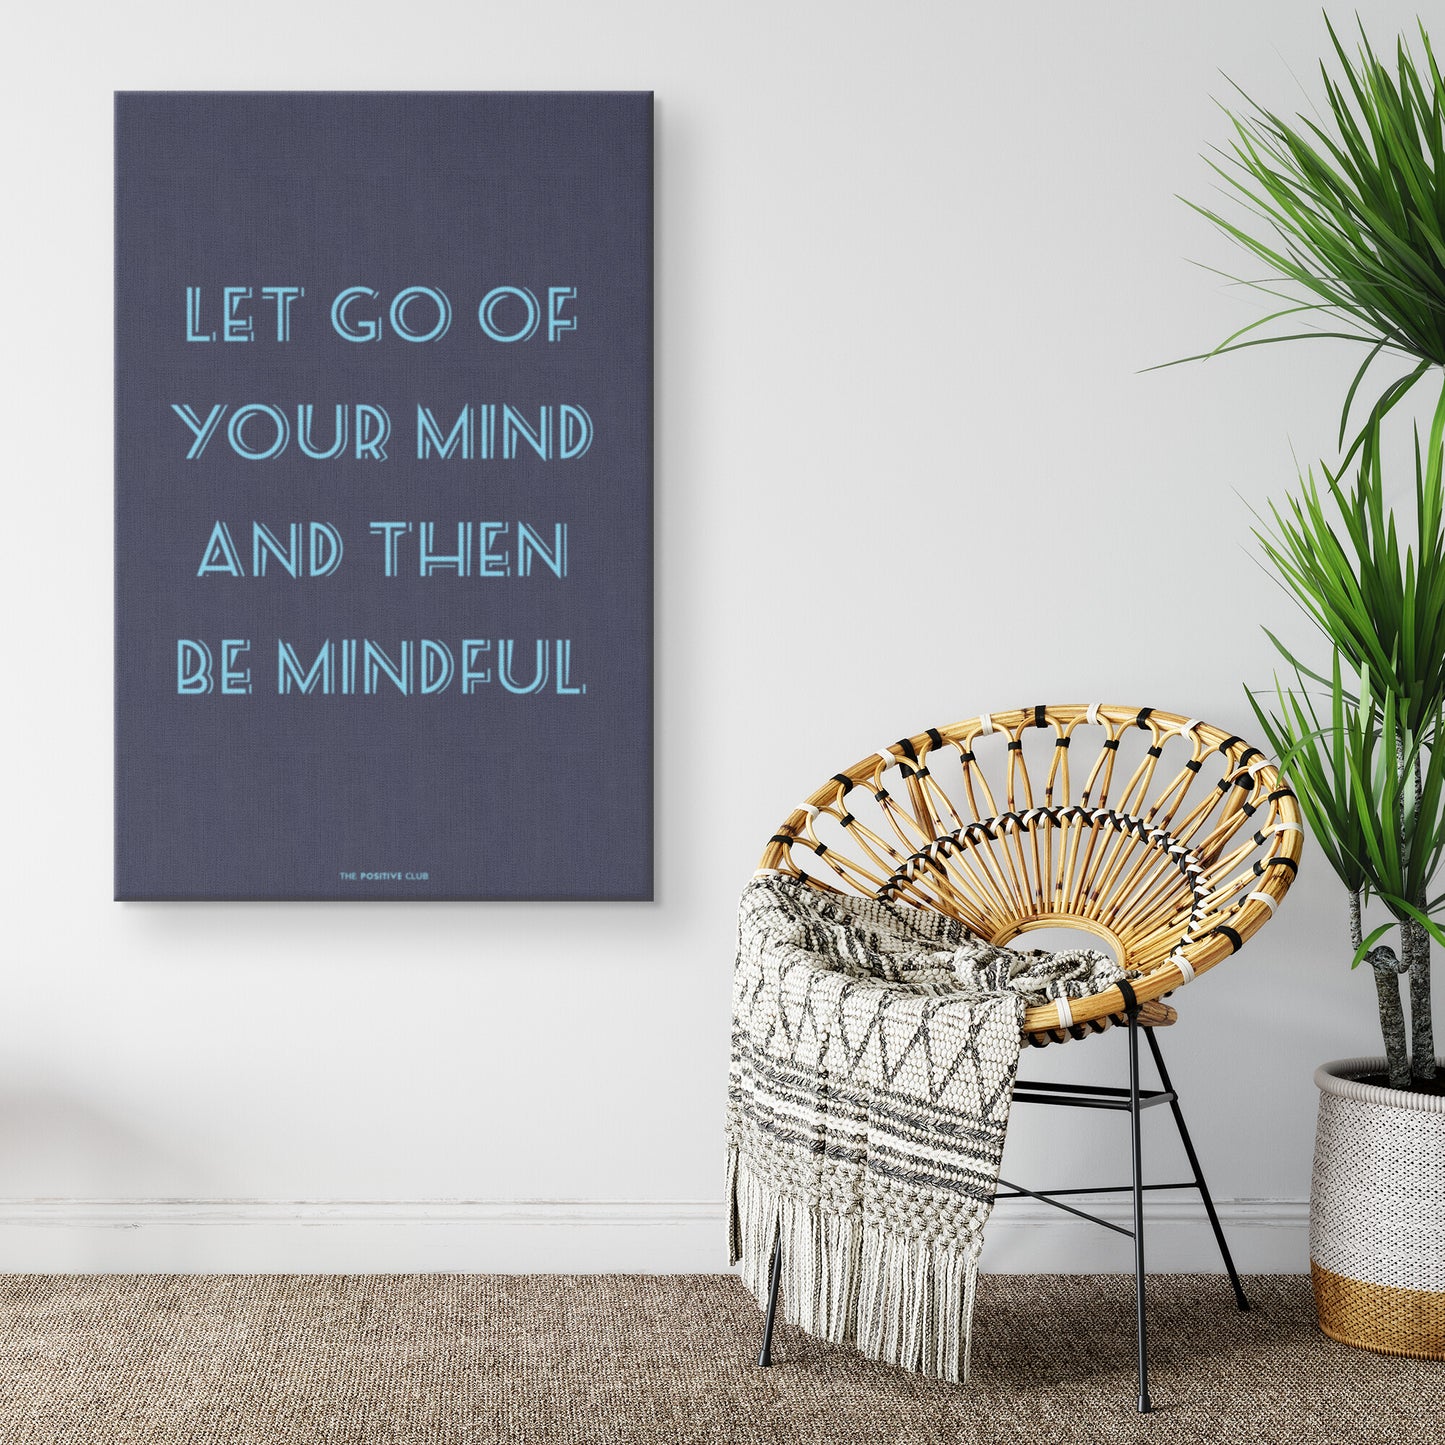 LET GO OF YOUR MIND AND THEN BE MINDFUL